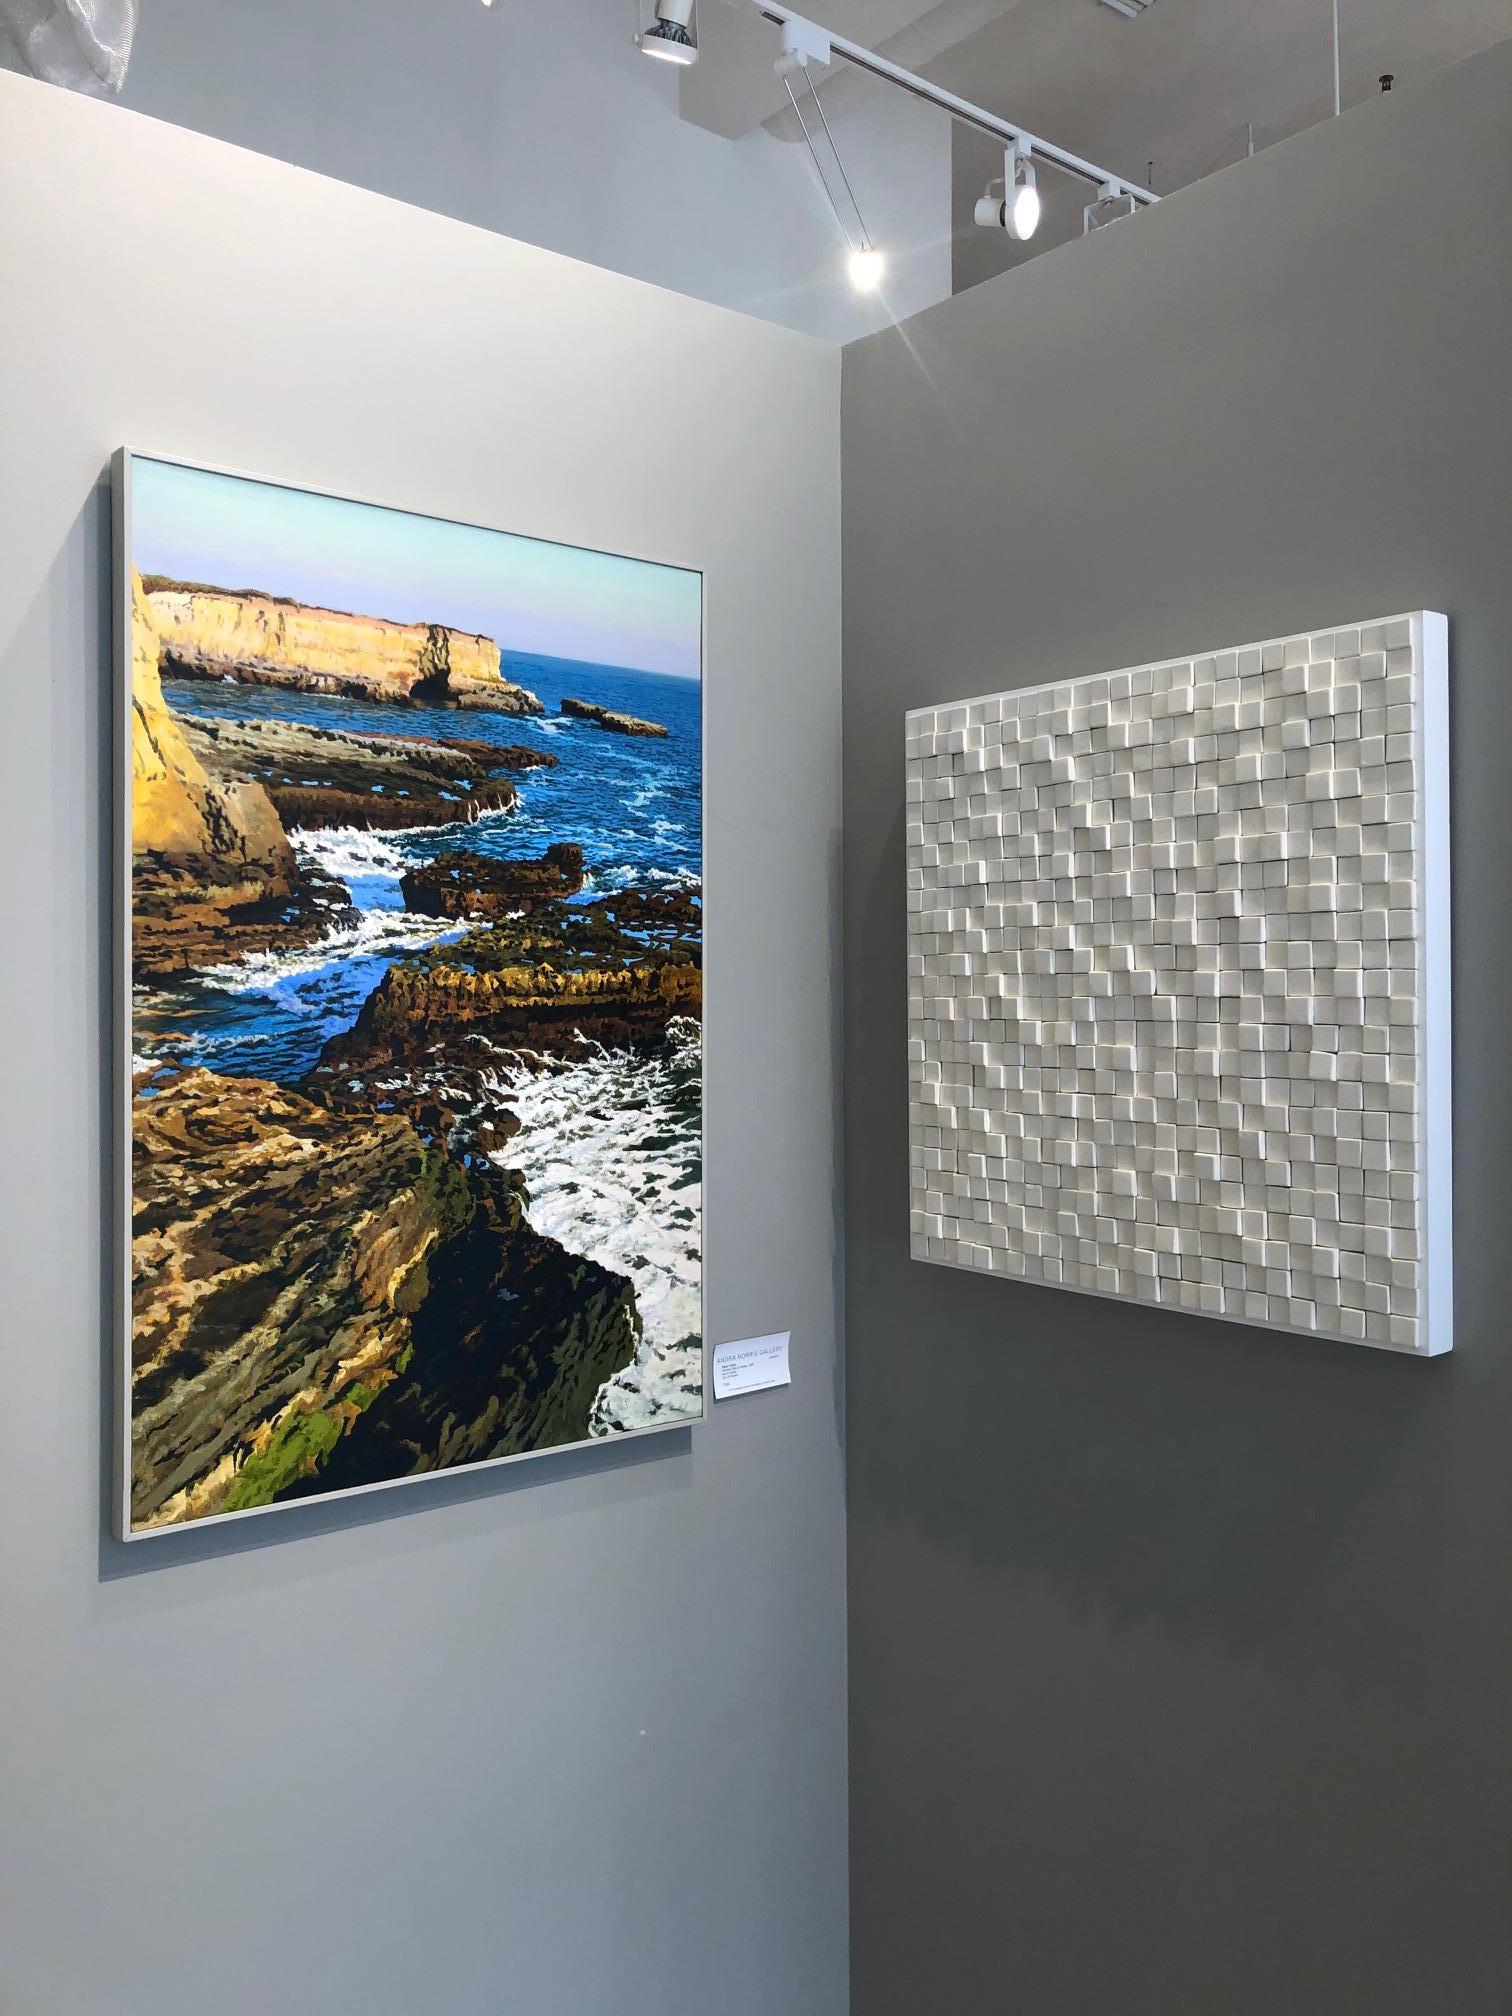 Abstract Ceramic textural 3D three dimensional wall sculpture in pure white. Natural abstract geometric work created with ceramic squares mounted to a wood panel, from Pop Art pioneer Jane B. Grimm, whose minimal and meditative sculptures and wall